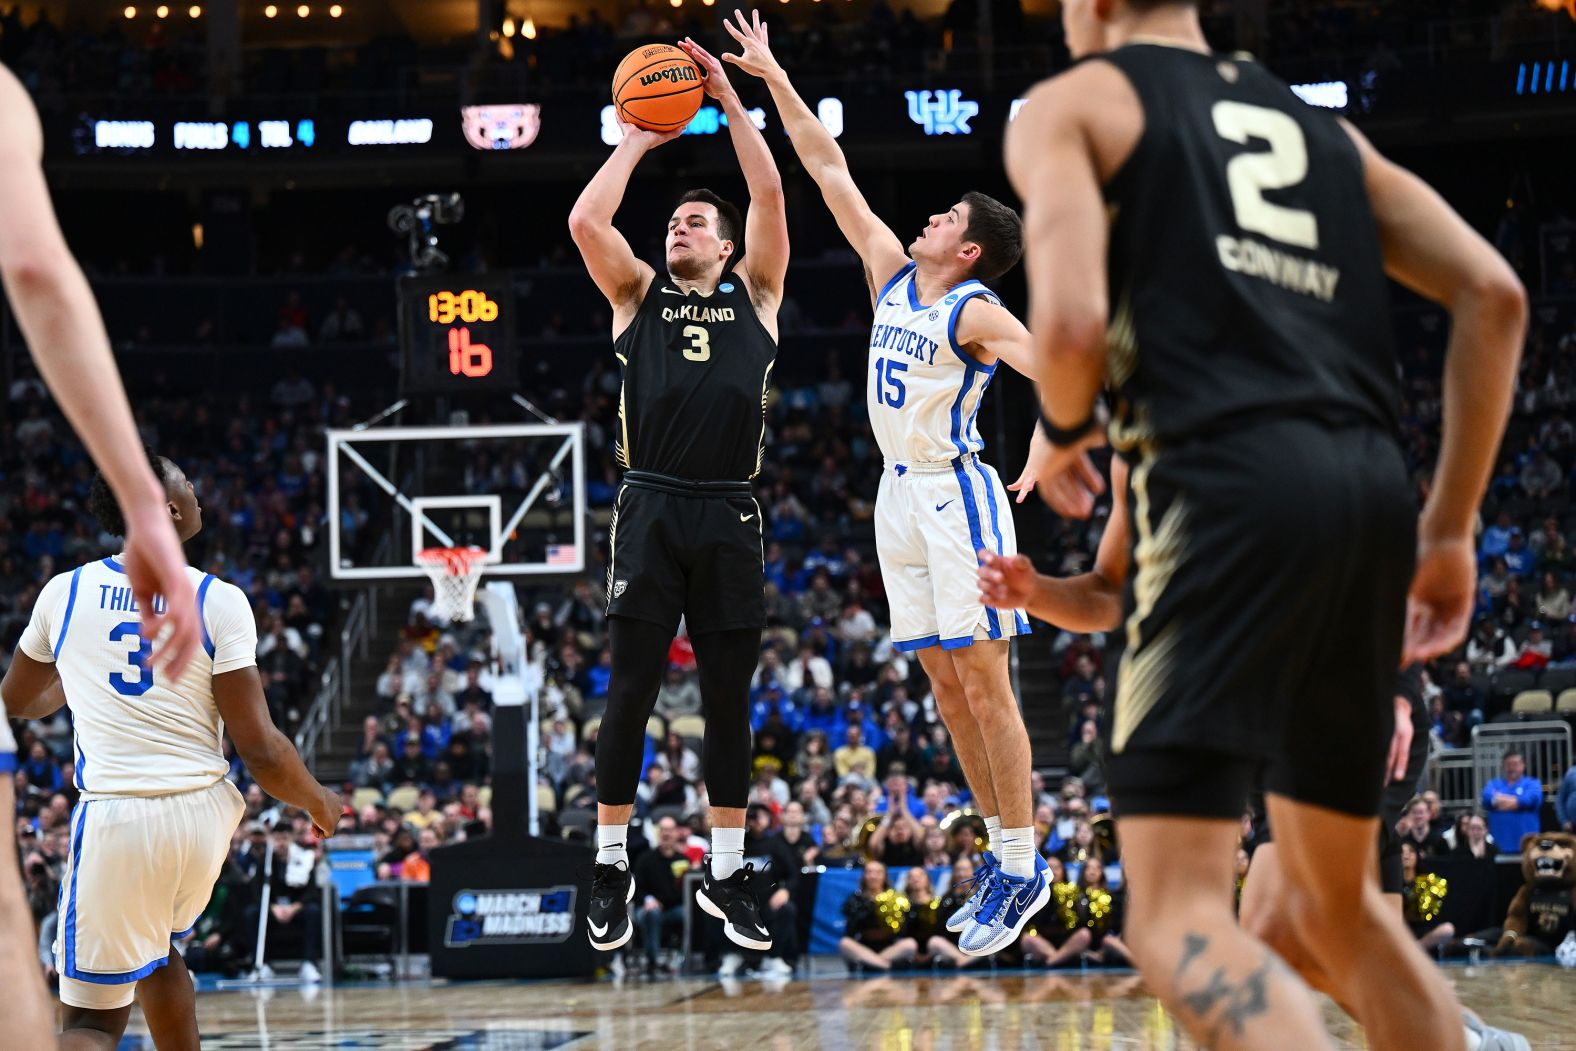 Oakland University's Jack Gohlke shoots a 3-pointer during his team's <a href="index.php?page=&url=https%3A%2F%2Fwww.cnn.com%2F2024%2F03%2F23%2Fsport%2Fjack-gohlke-oakland-kentucky-march-madness-spt-intl%2Findex.html" target="_blank">NCAA Tournament win over Kentucky</a> on Thursday, March 21. Gohlke hit 10 3-pointers and scored a career-high 32 points as the 14th-seeded Golden Grizzlies upset the 3-seeded Wildcats 80-76. 